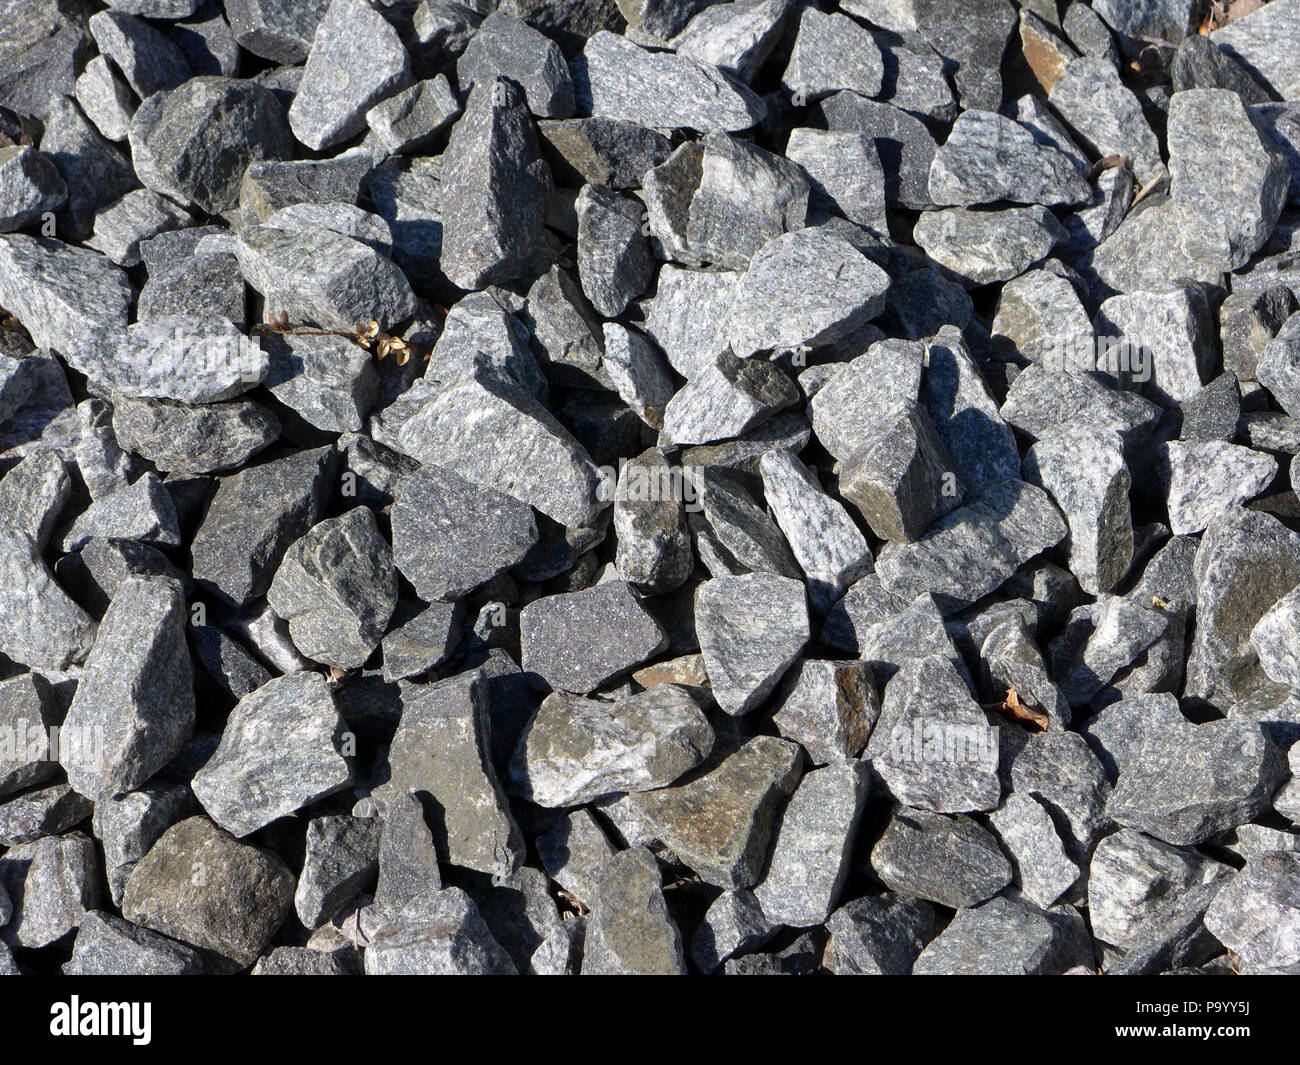 Crushed stones for railroad bed. Stock Photo